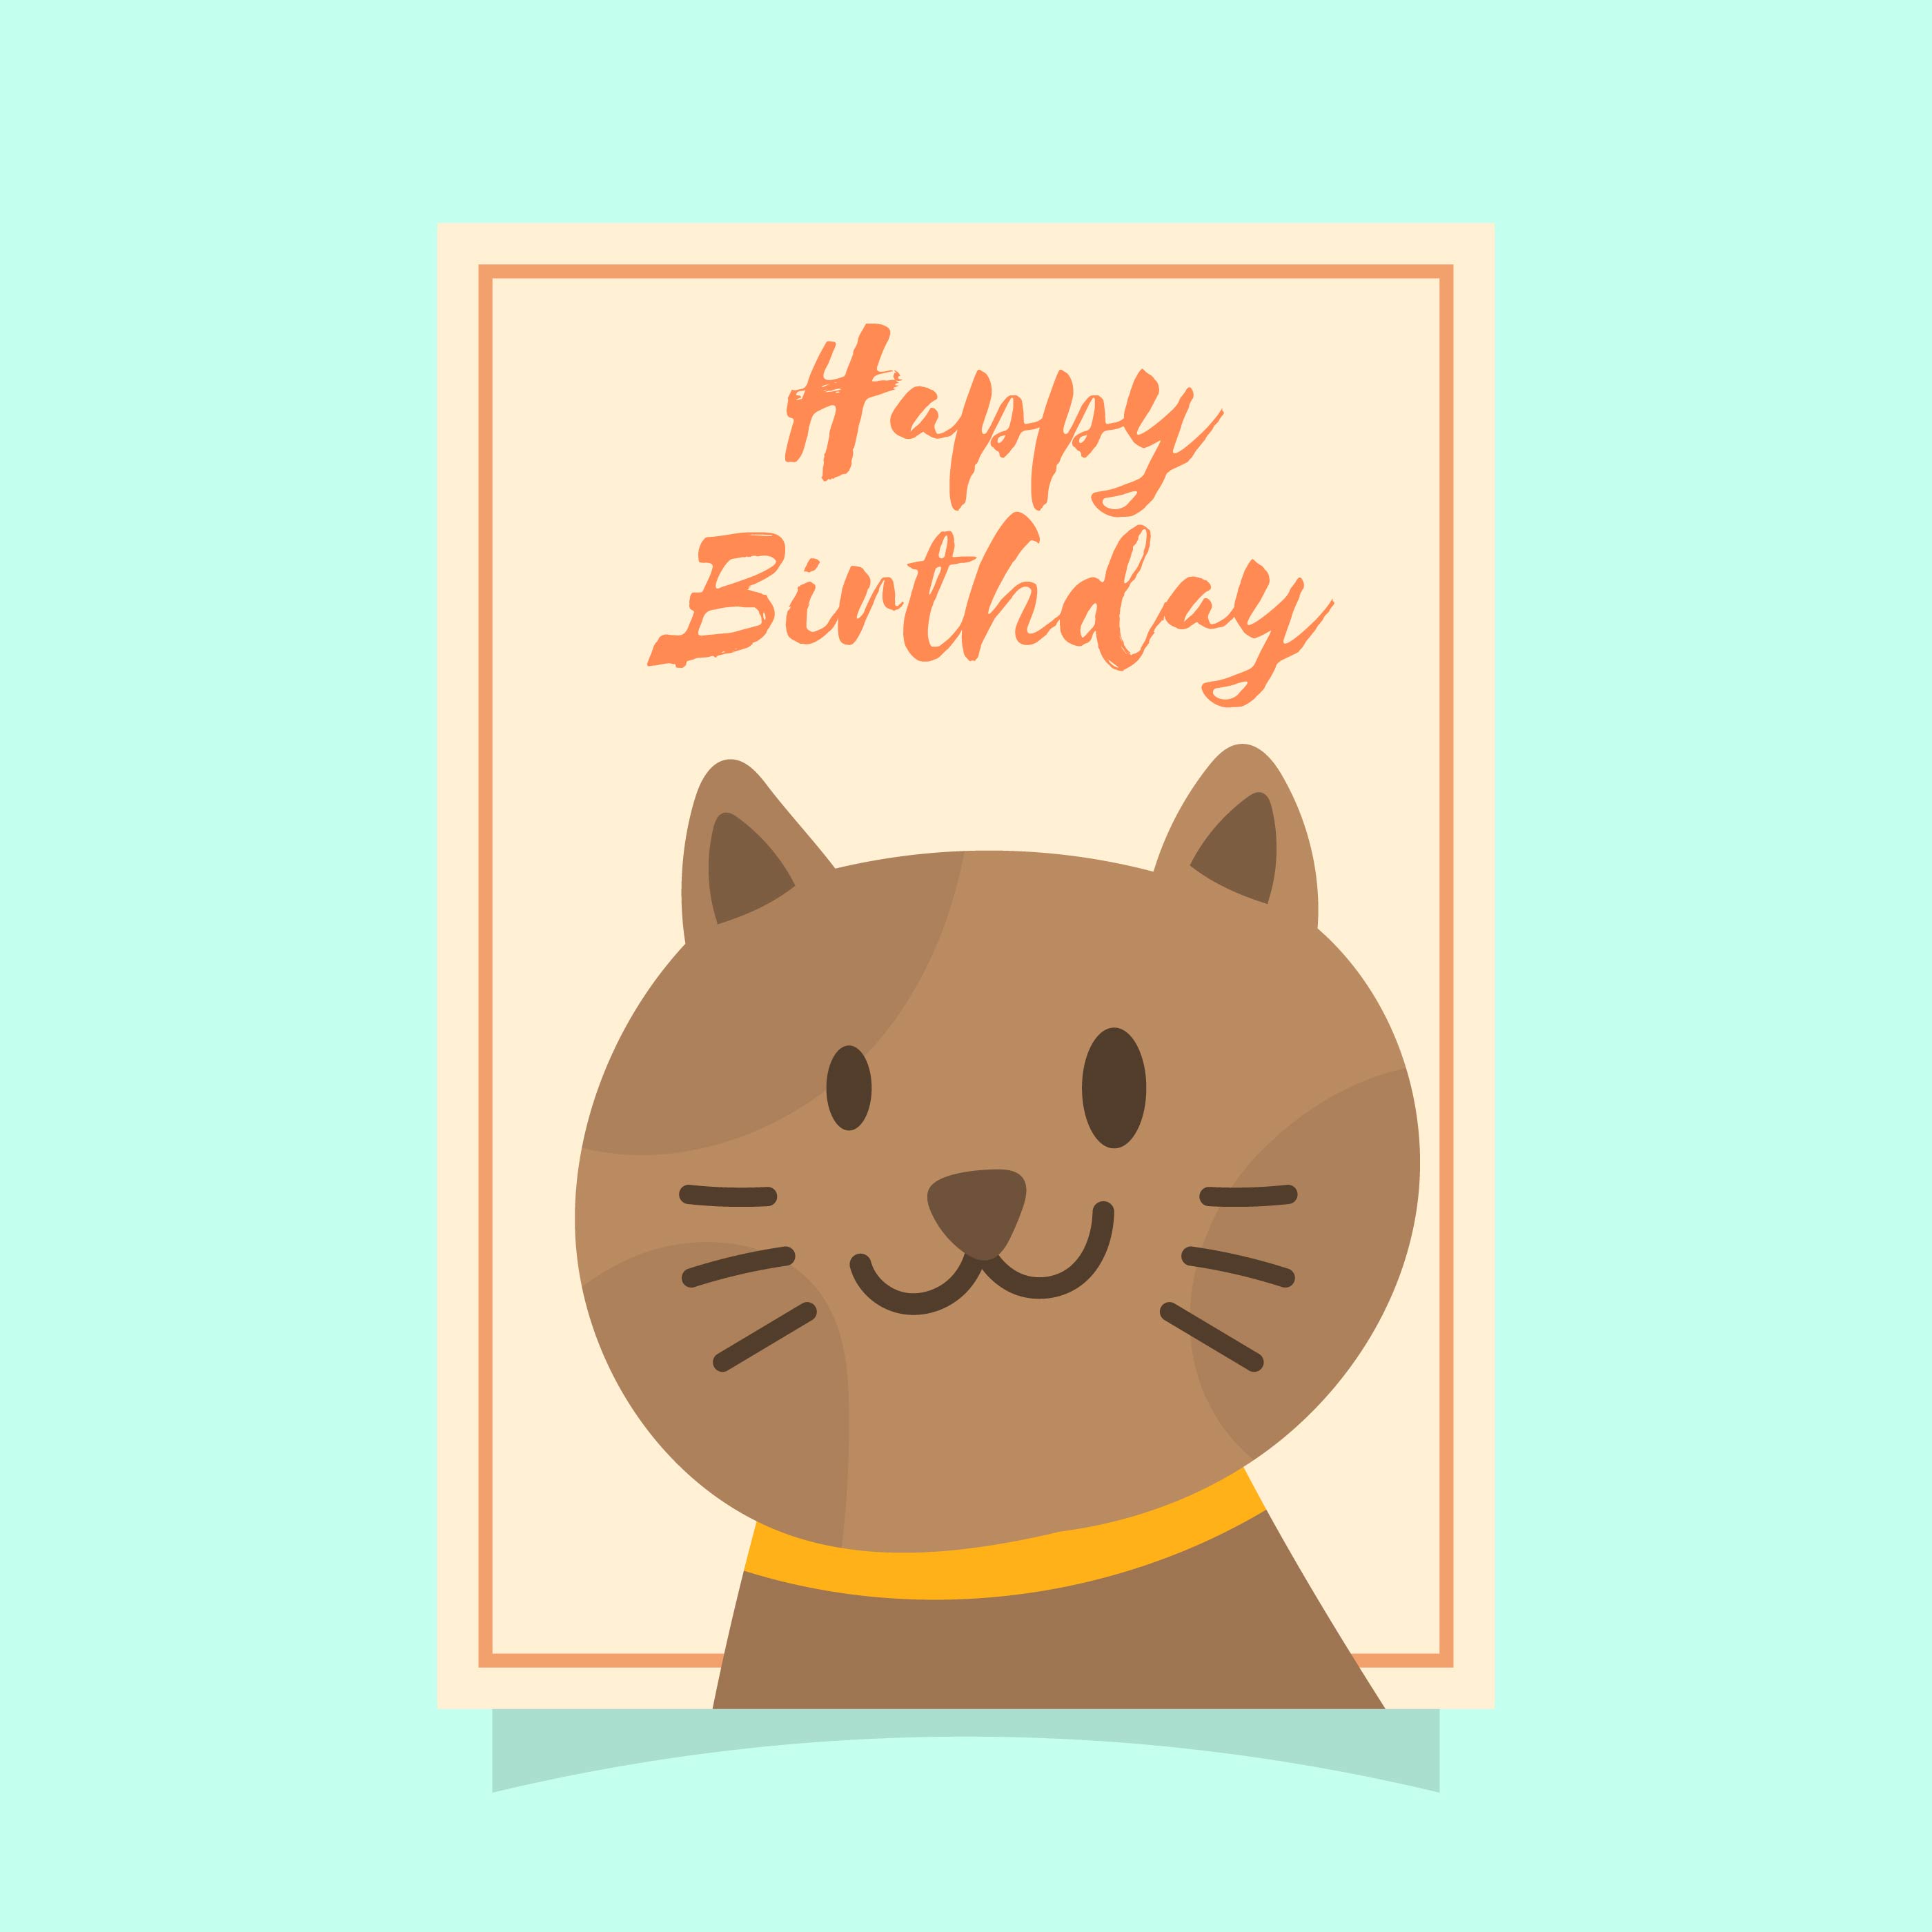 Cat Birthday Greeting Card Download Free Vectors, Clipart Graphics